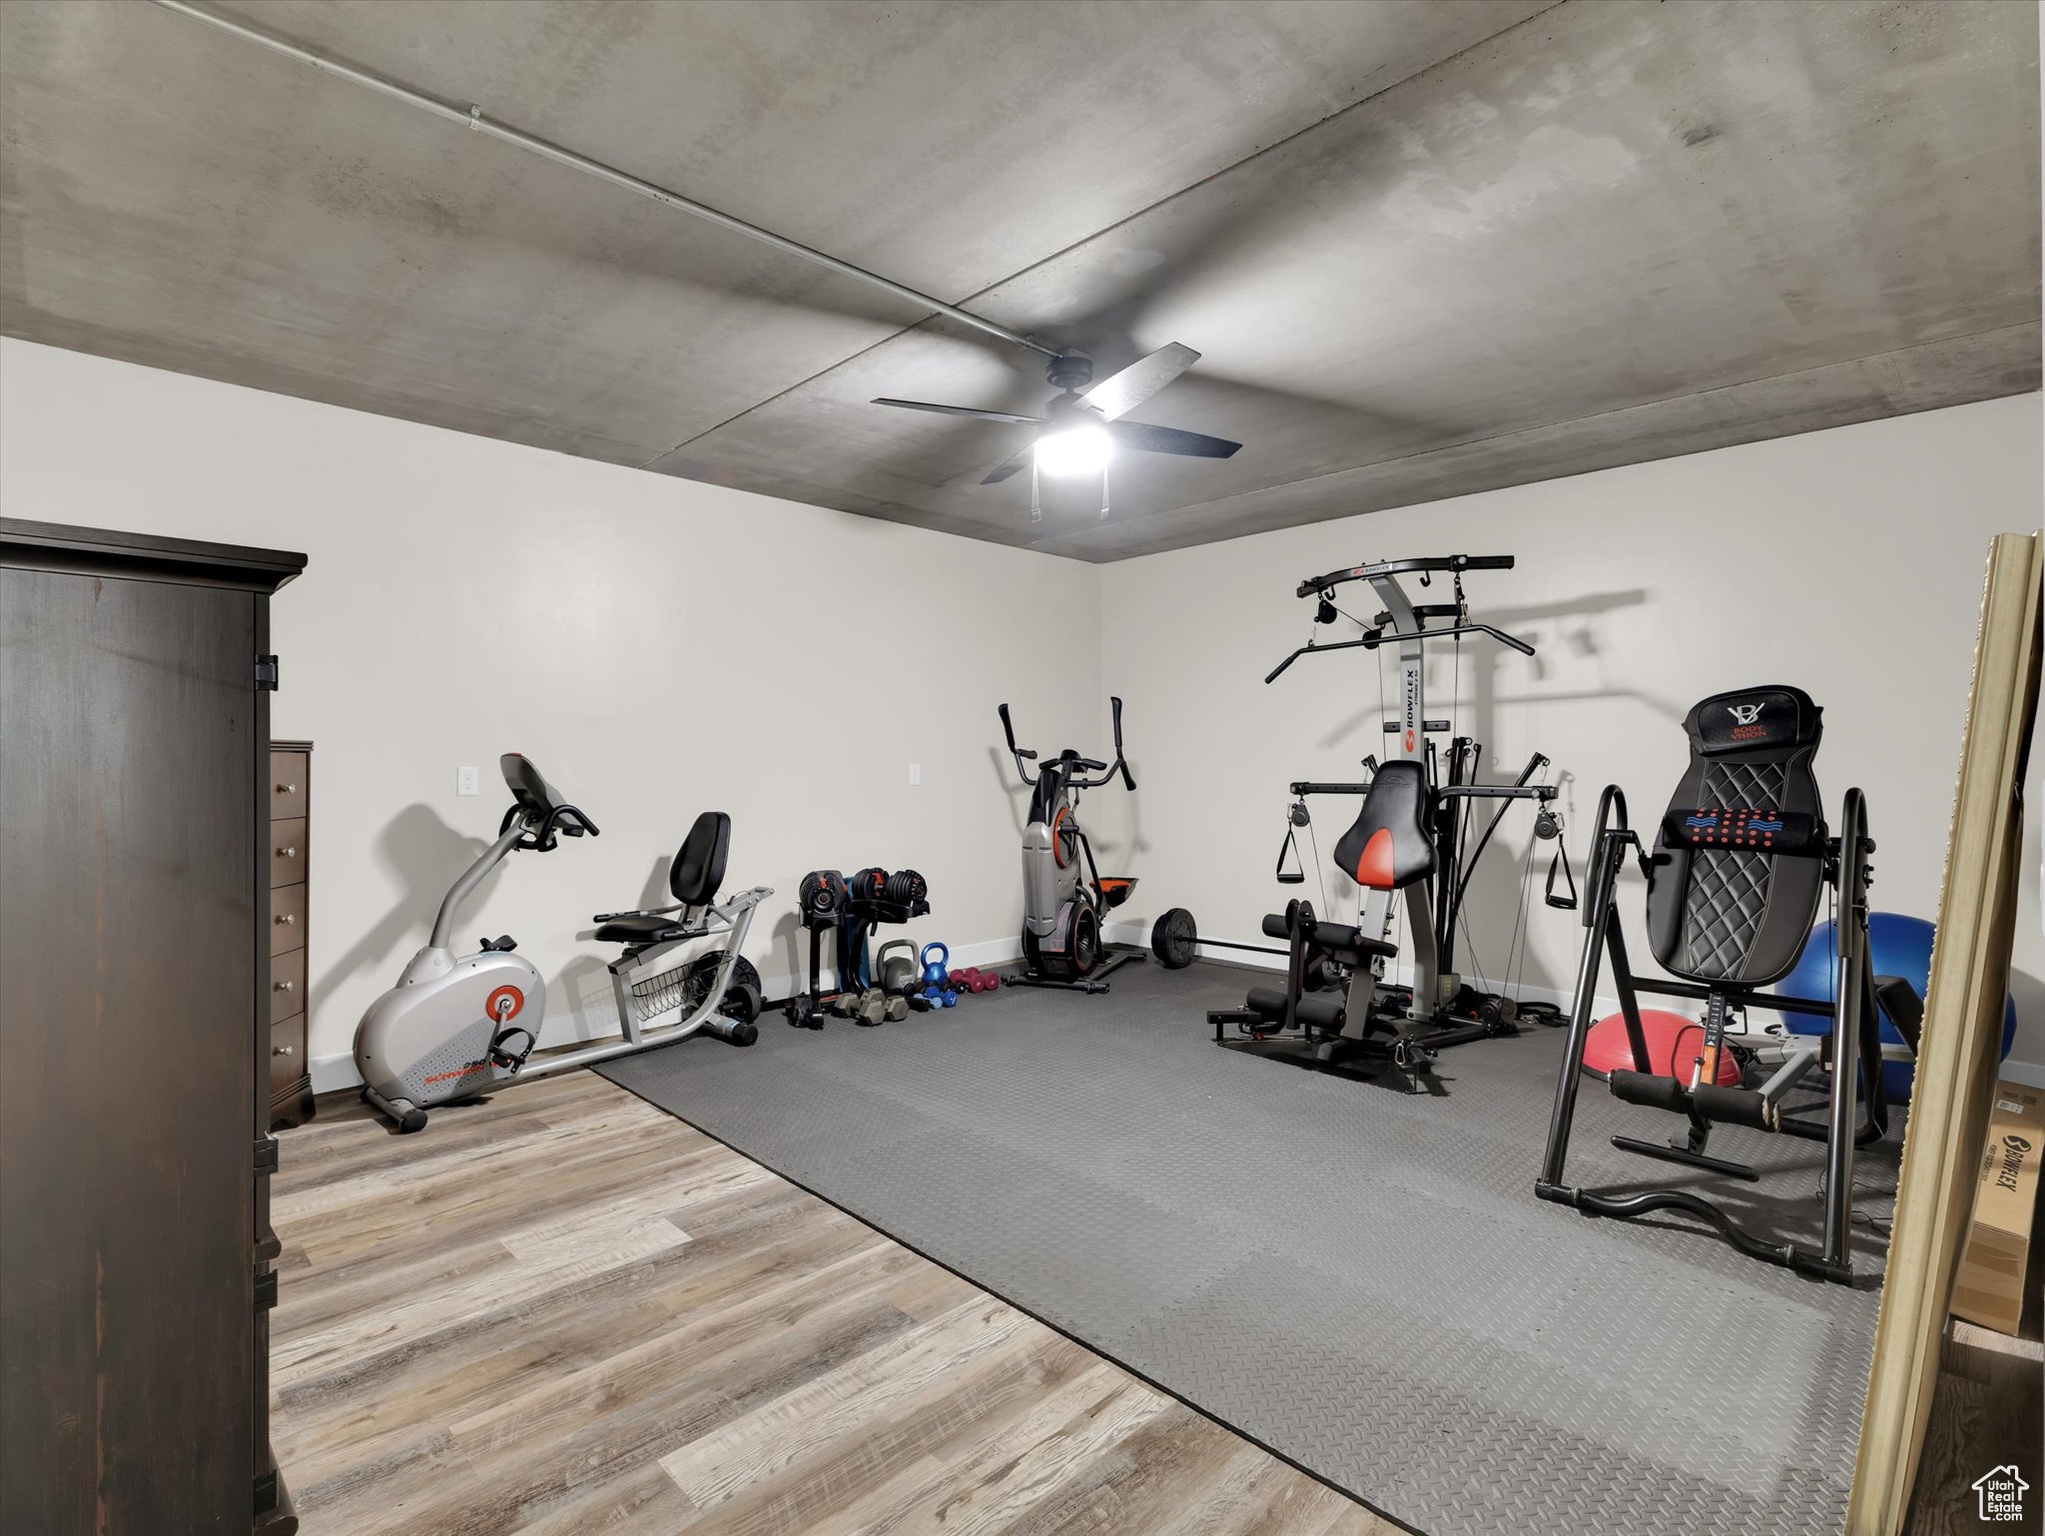 This room is underneath the back deck and stays cooler year round. Can be used as a gym or storage room.